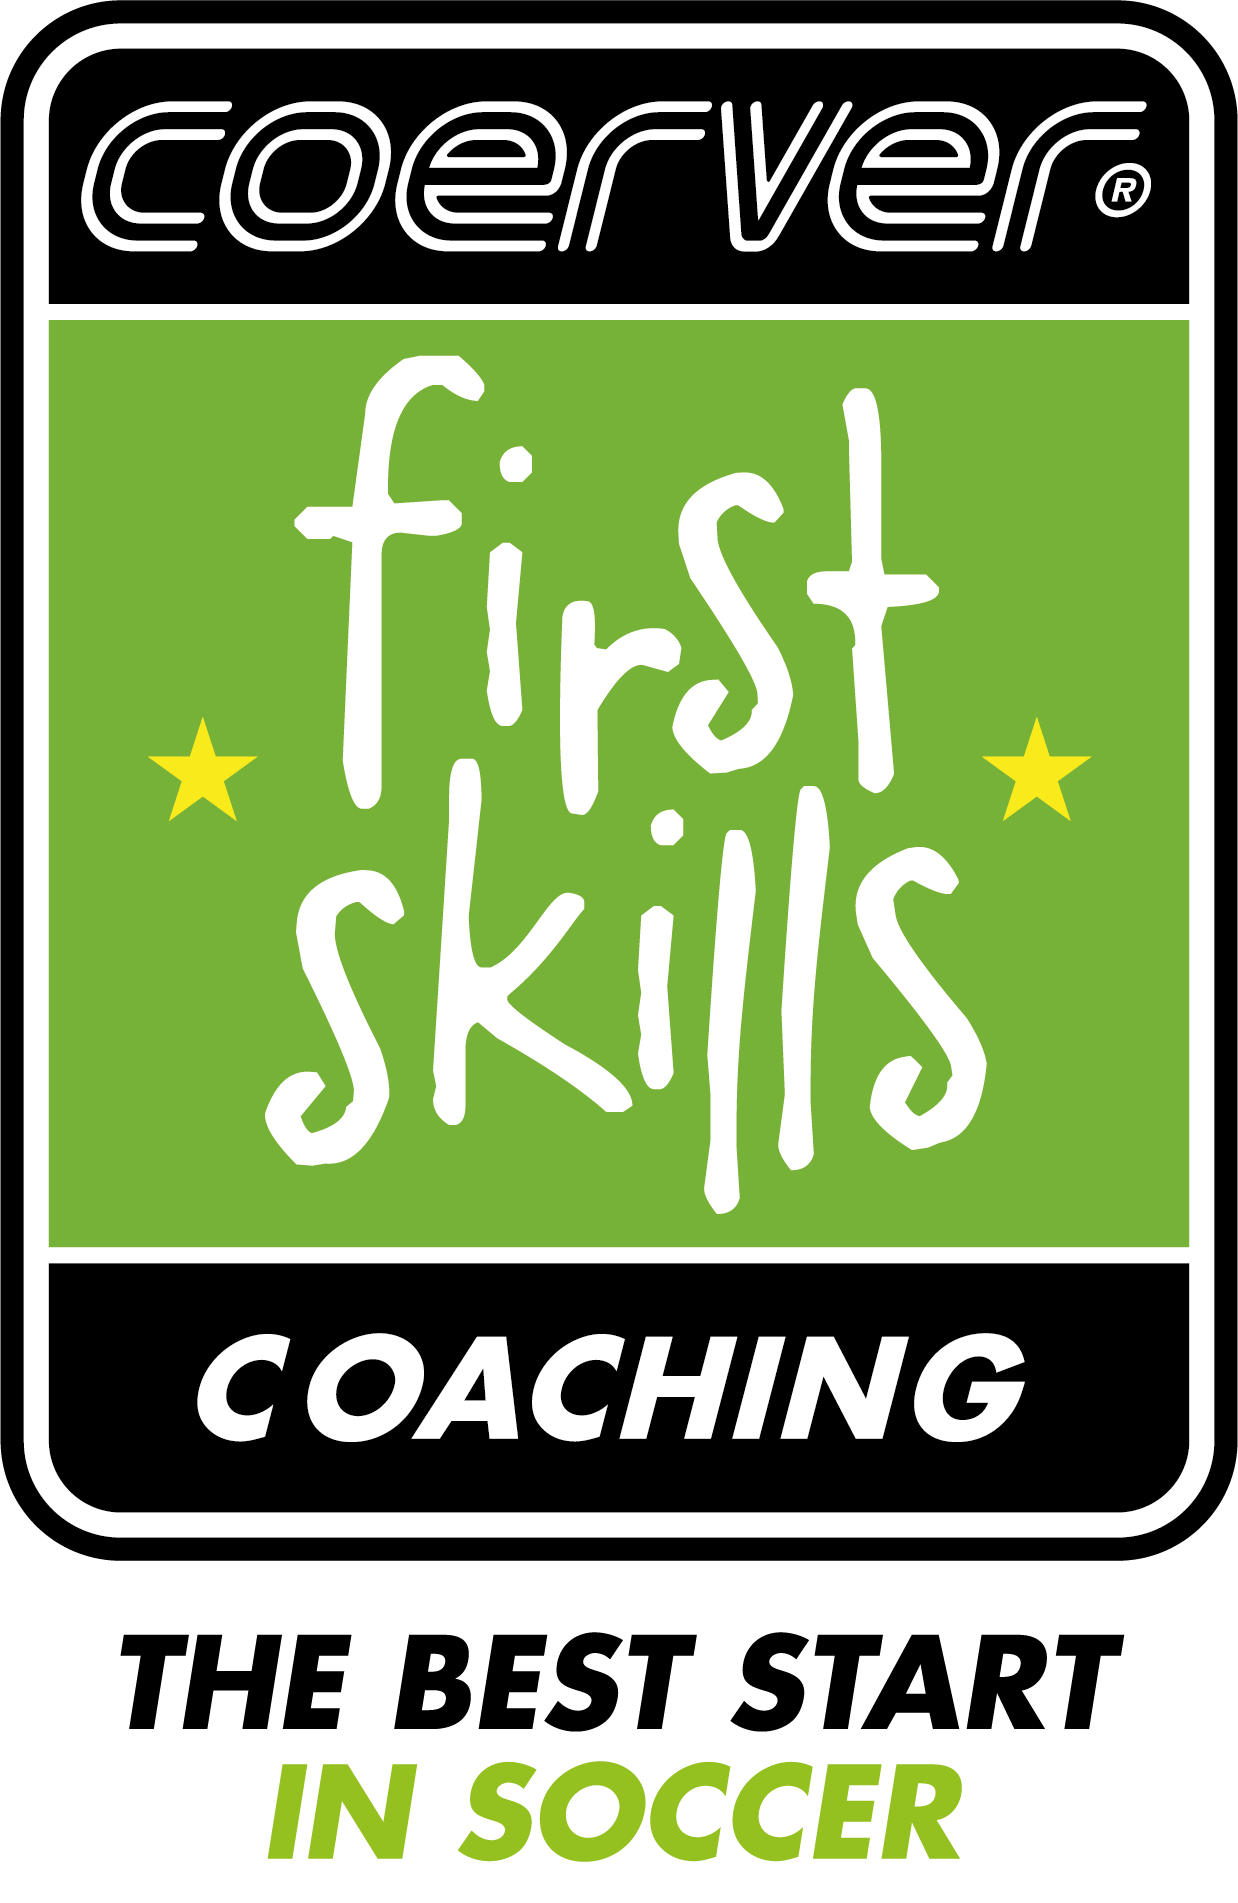 Programme Page – First Skills Logo